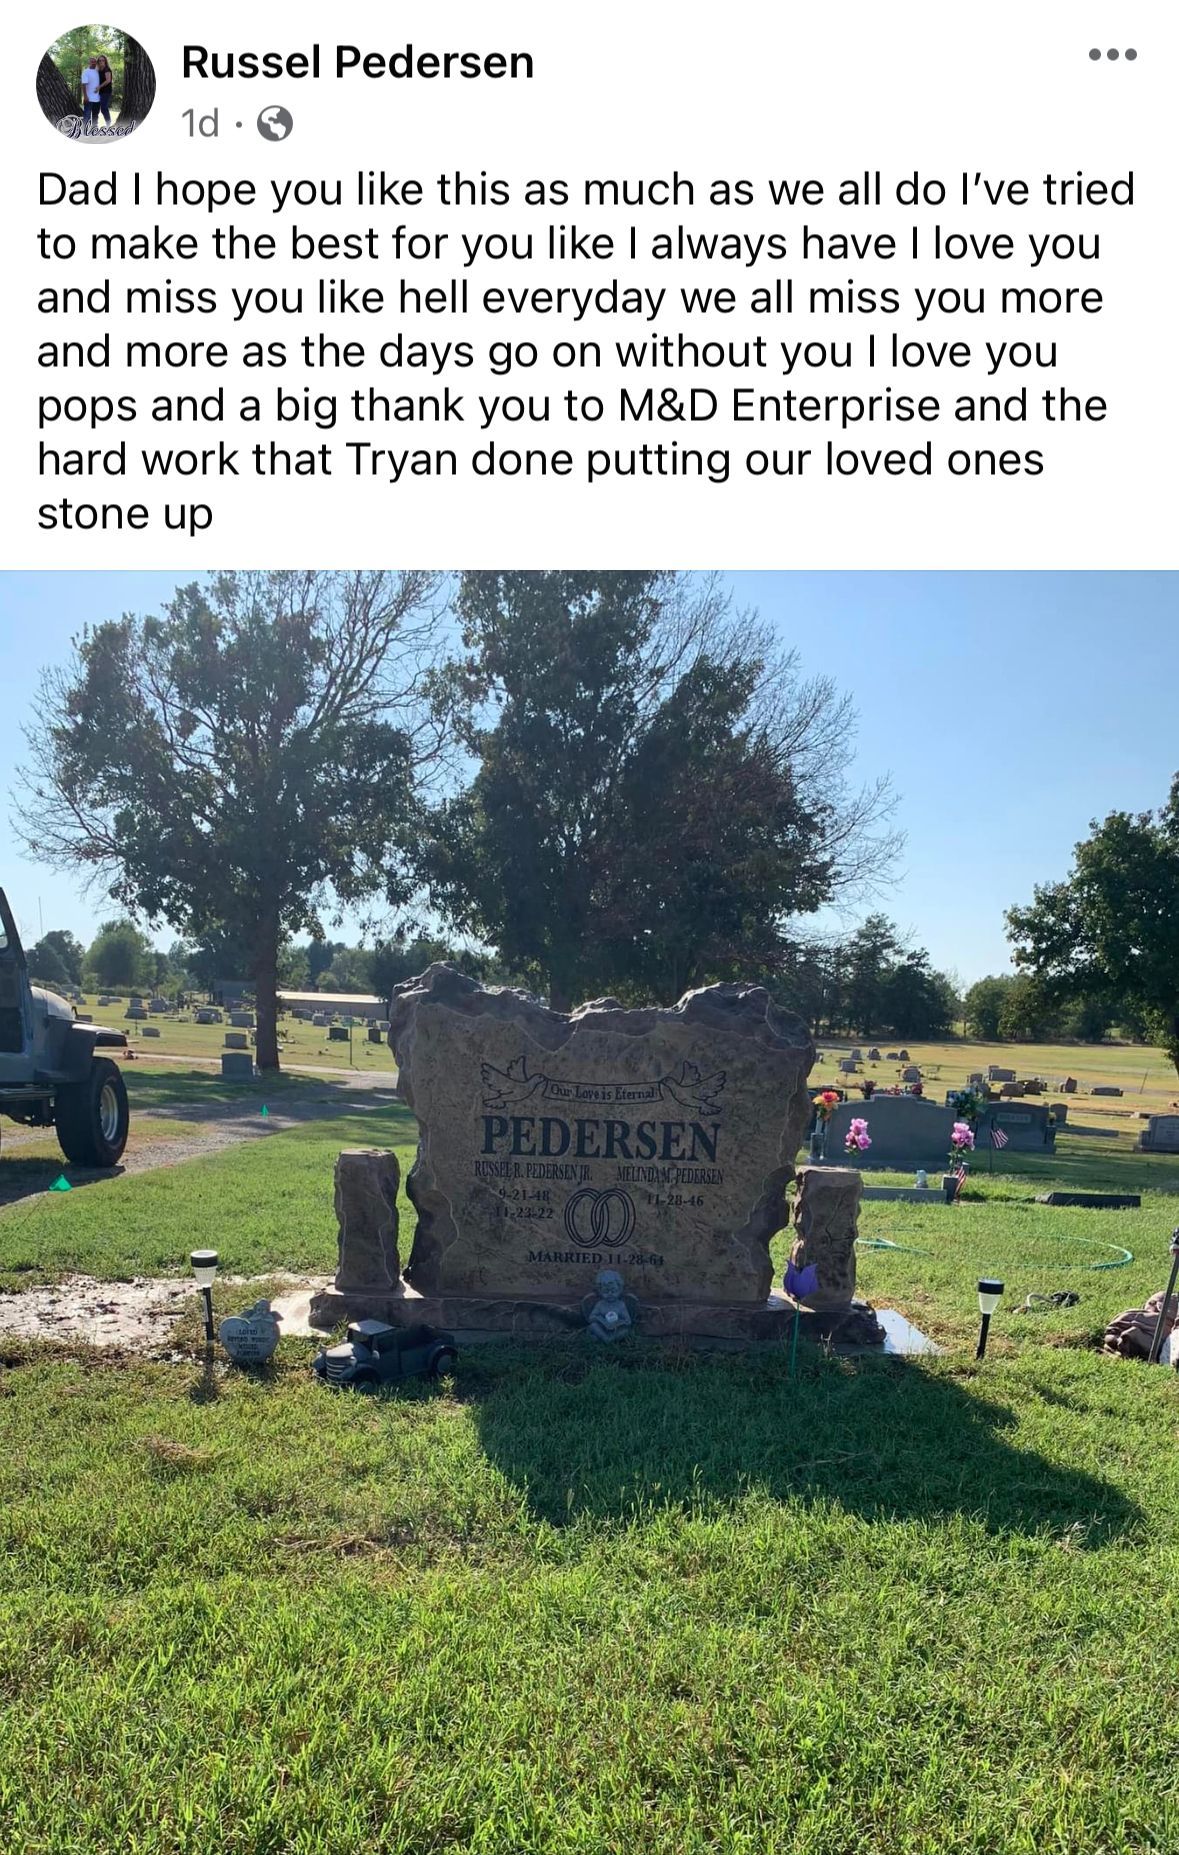 a gravestone in a cemetery has the name pedersen on it